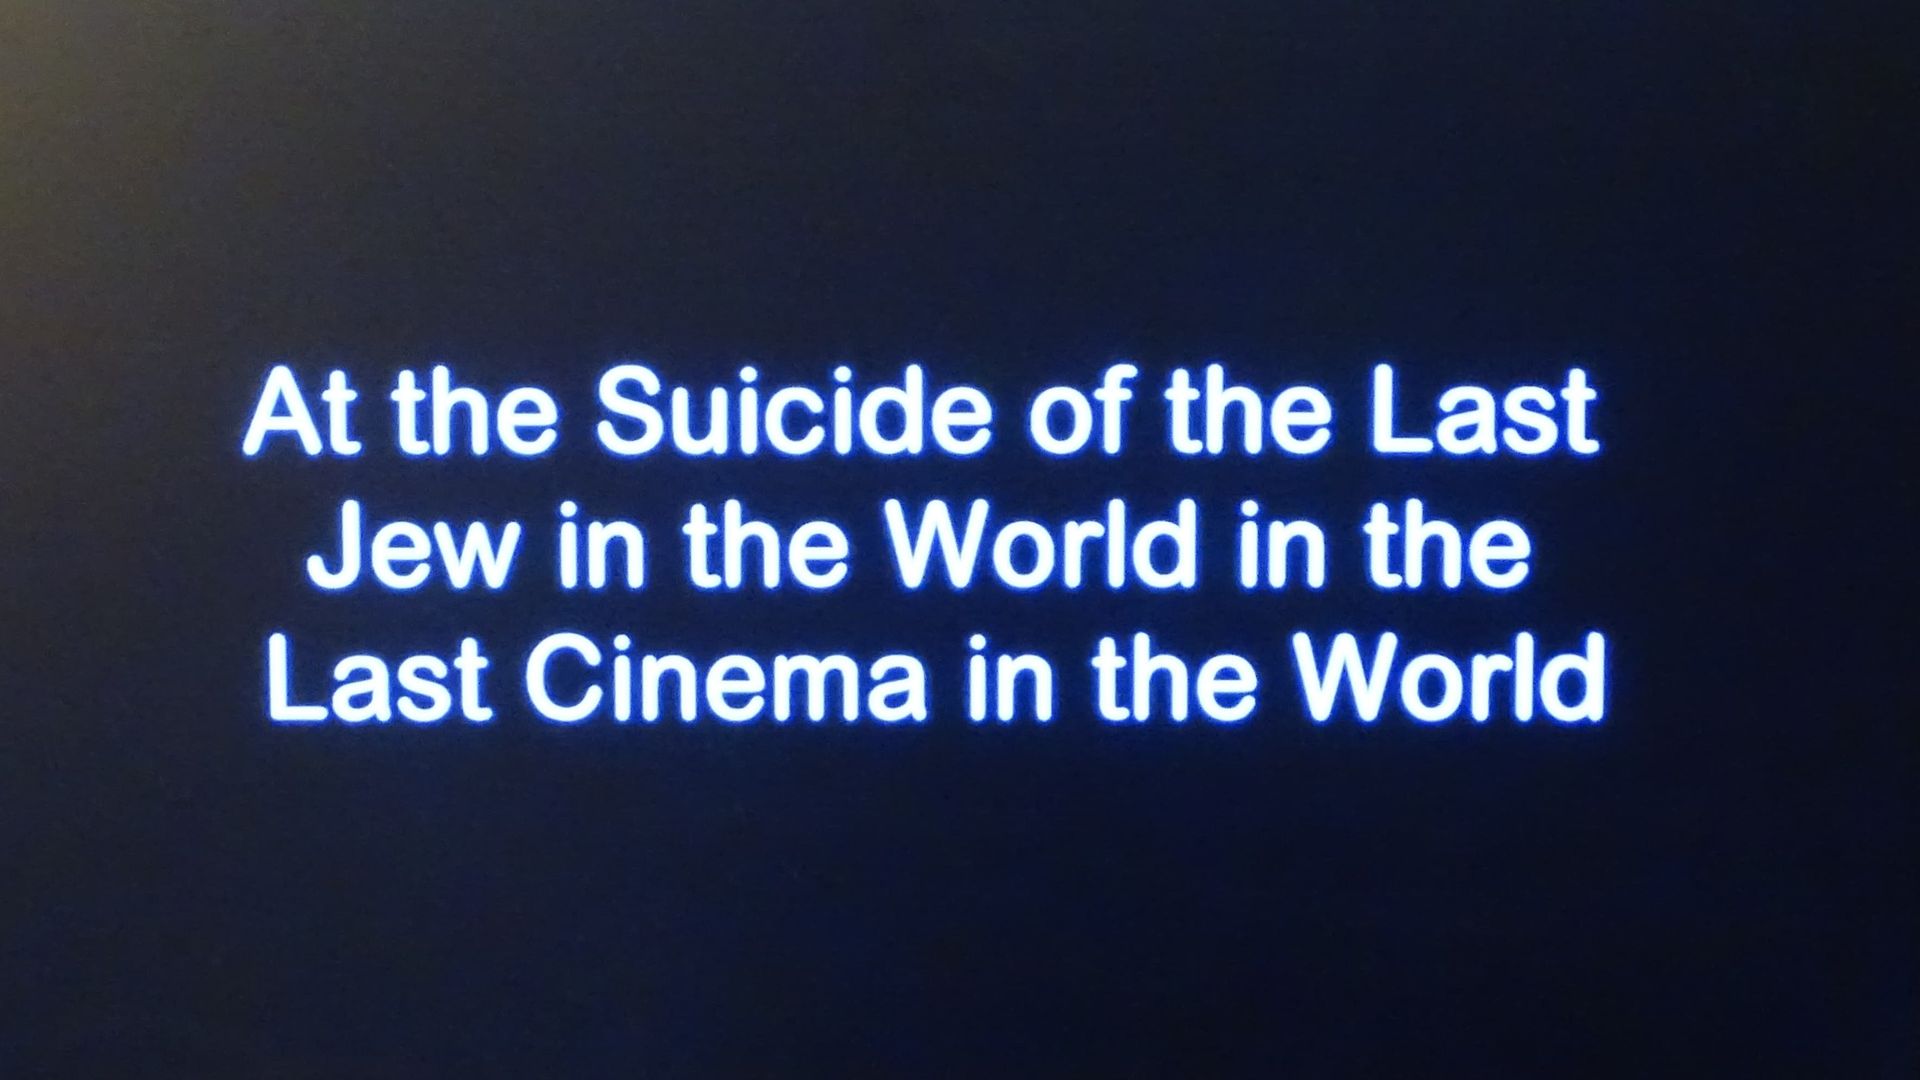 At the Suicide of the Last Jew in the World in the Last Cinema in the World background